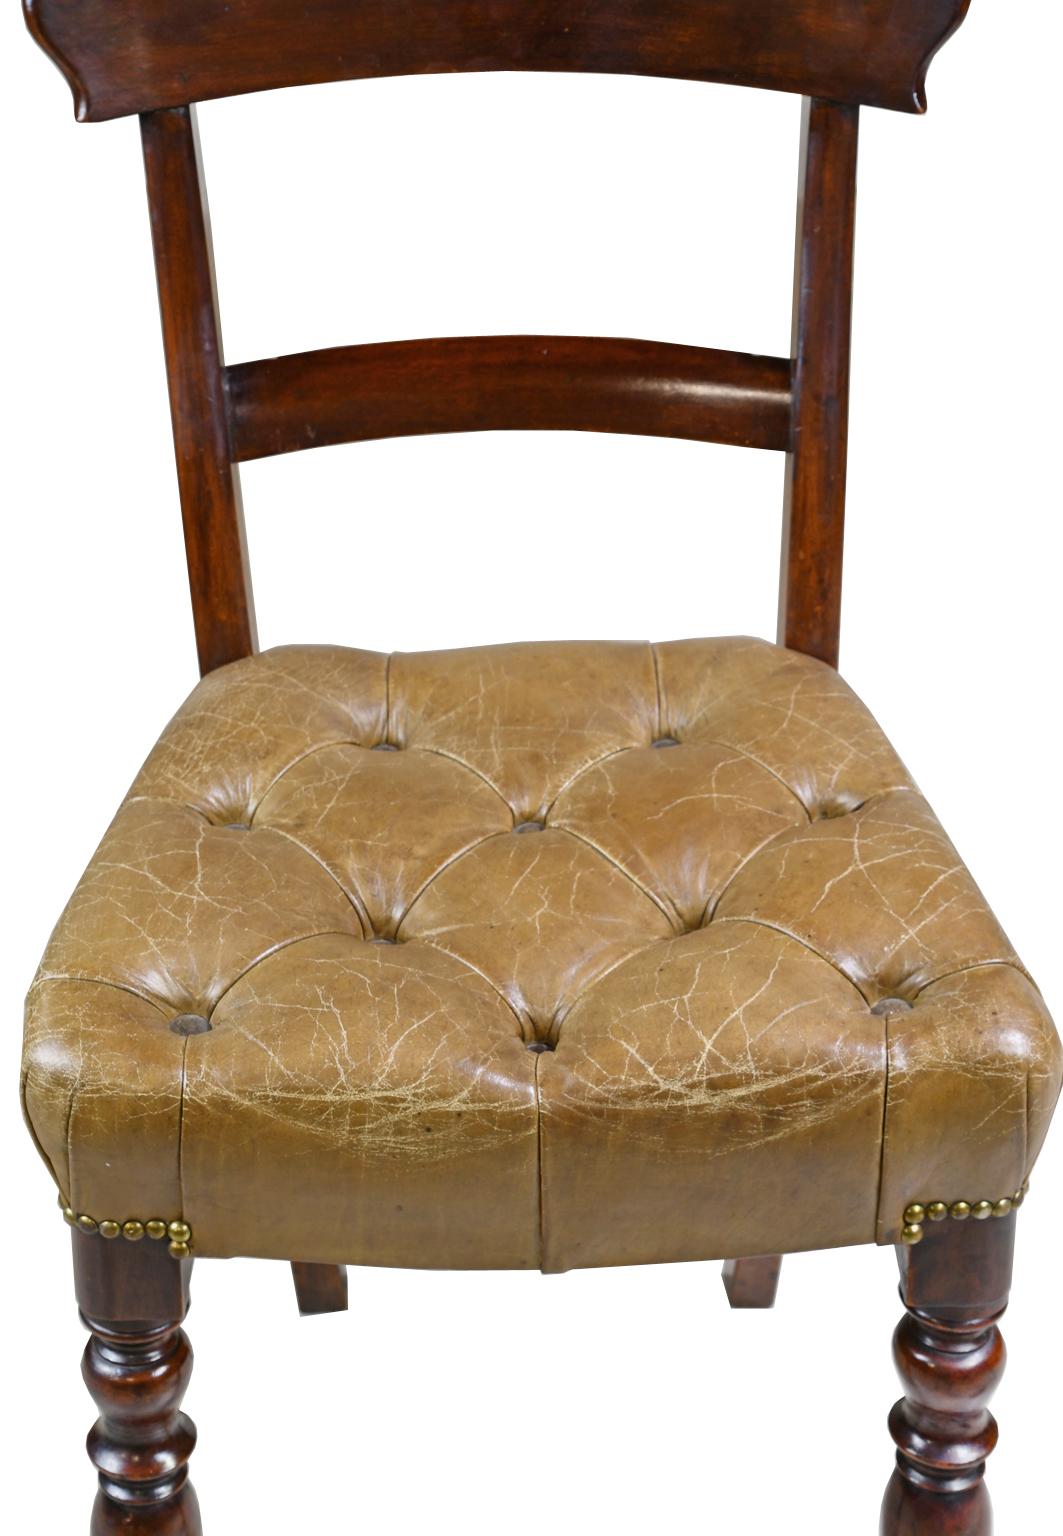 A pair of early Victorian side chairs in mahogany with curved top rail, and raised on turned front legs and saber back legs. Seat is upholstered in a tufted, beige/camel-colored leather with brass nailheads, England, circa 1840. 

Measures: 18